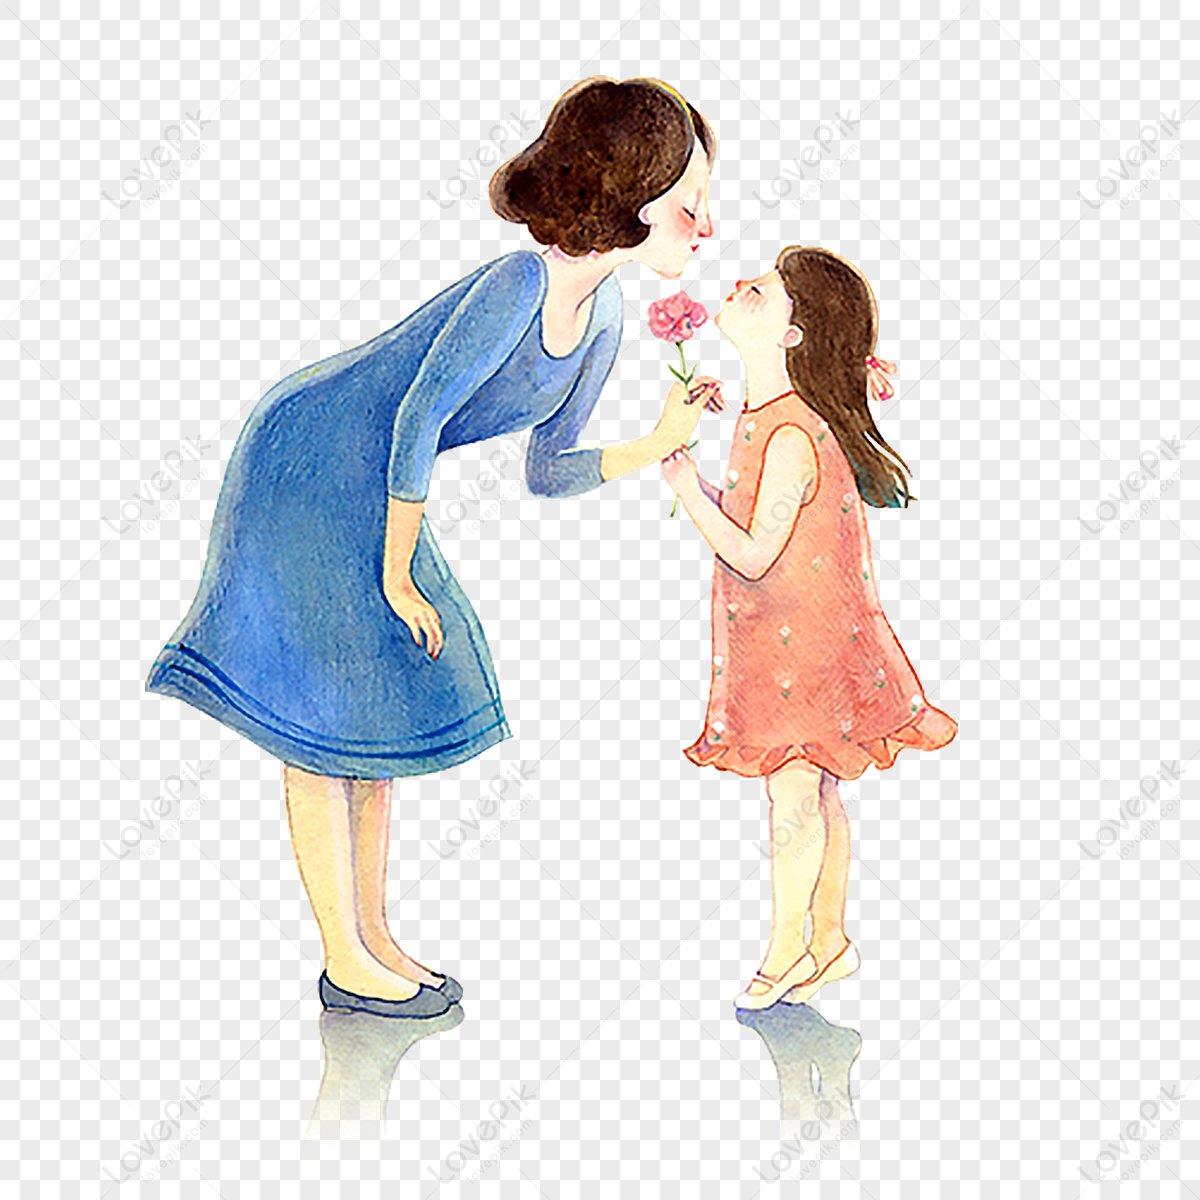 Spanish Mother Day Greeting Stock Illustration - Download Image Now - Day,  Mother, Text - iStock